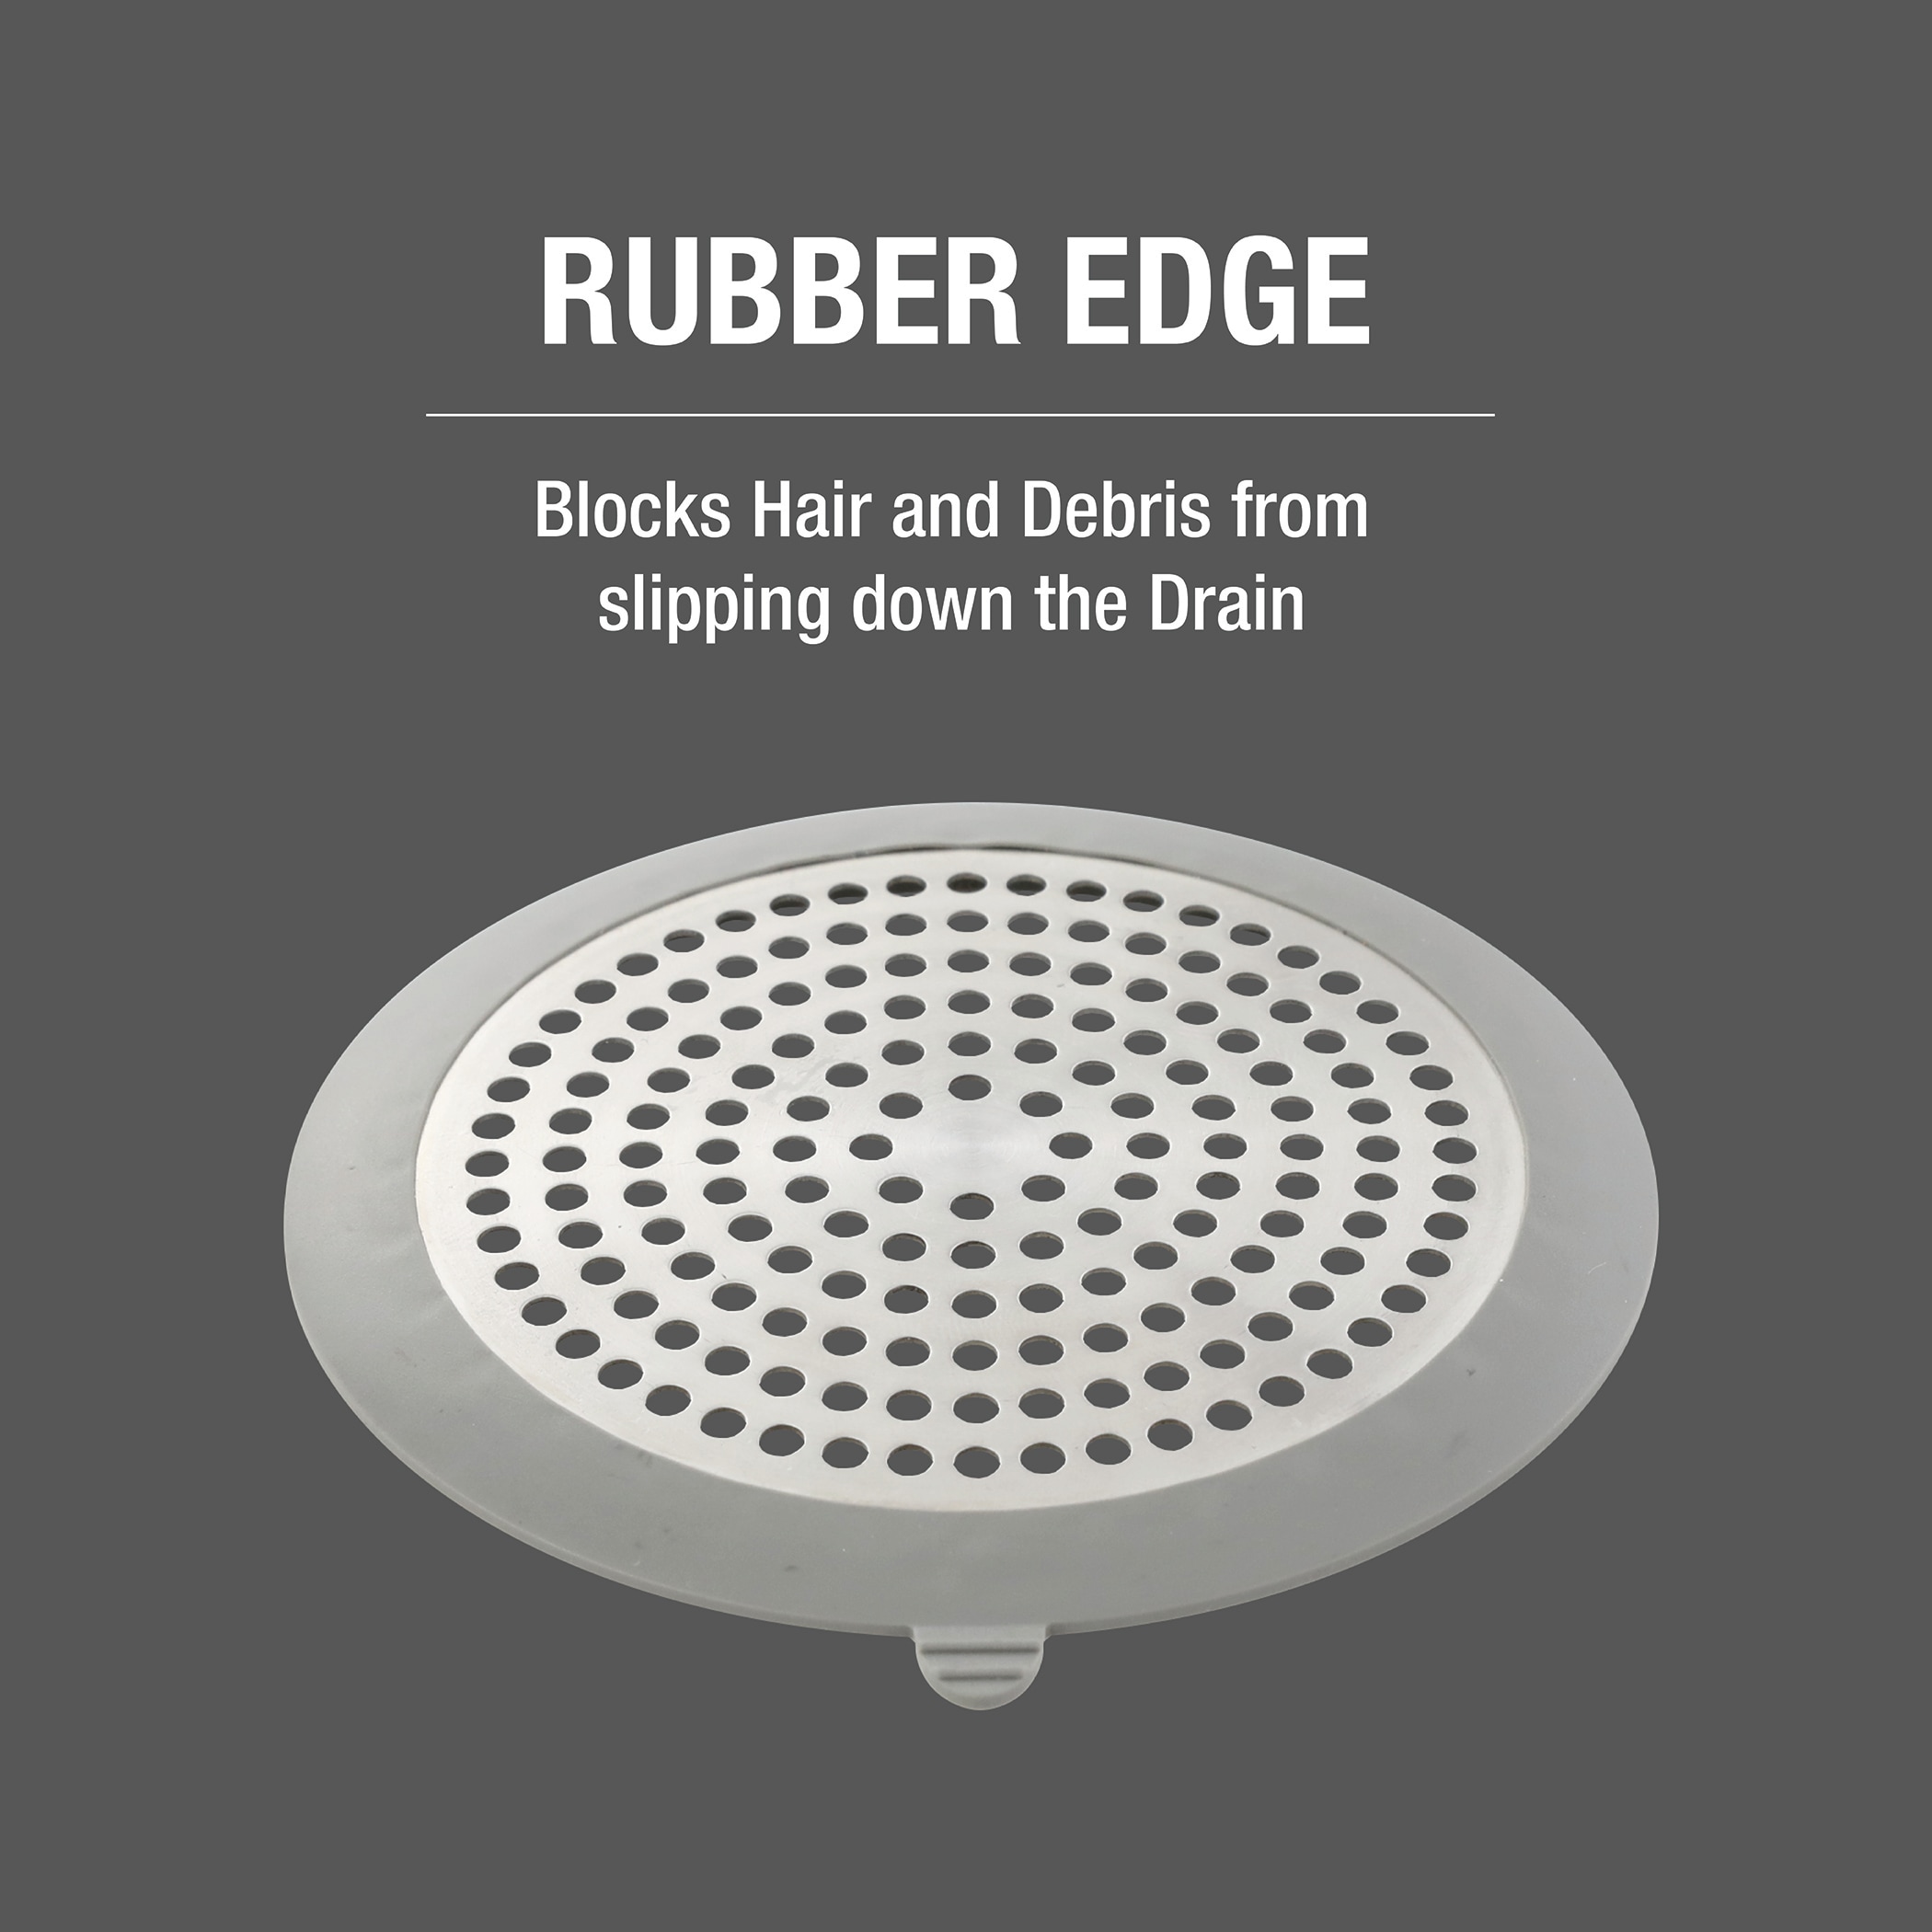 ShowerShroom (Gray) The 2 inch Hair Catcher That Prevents Clogged